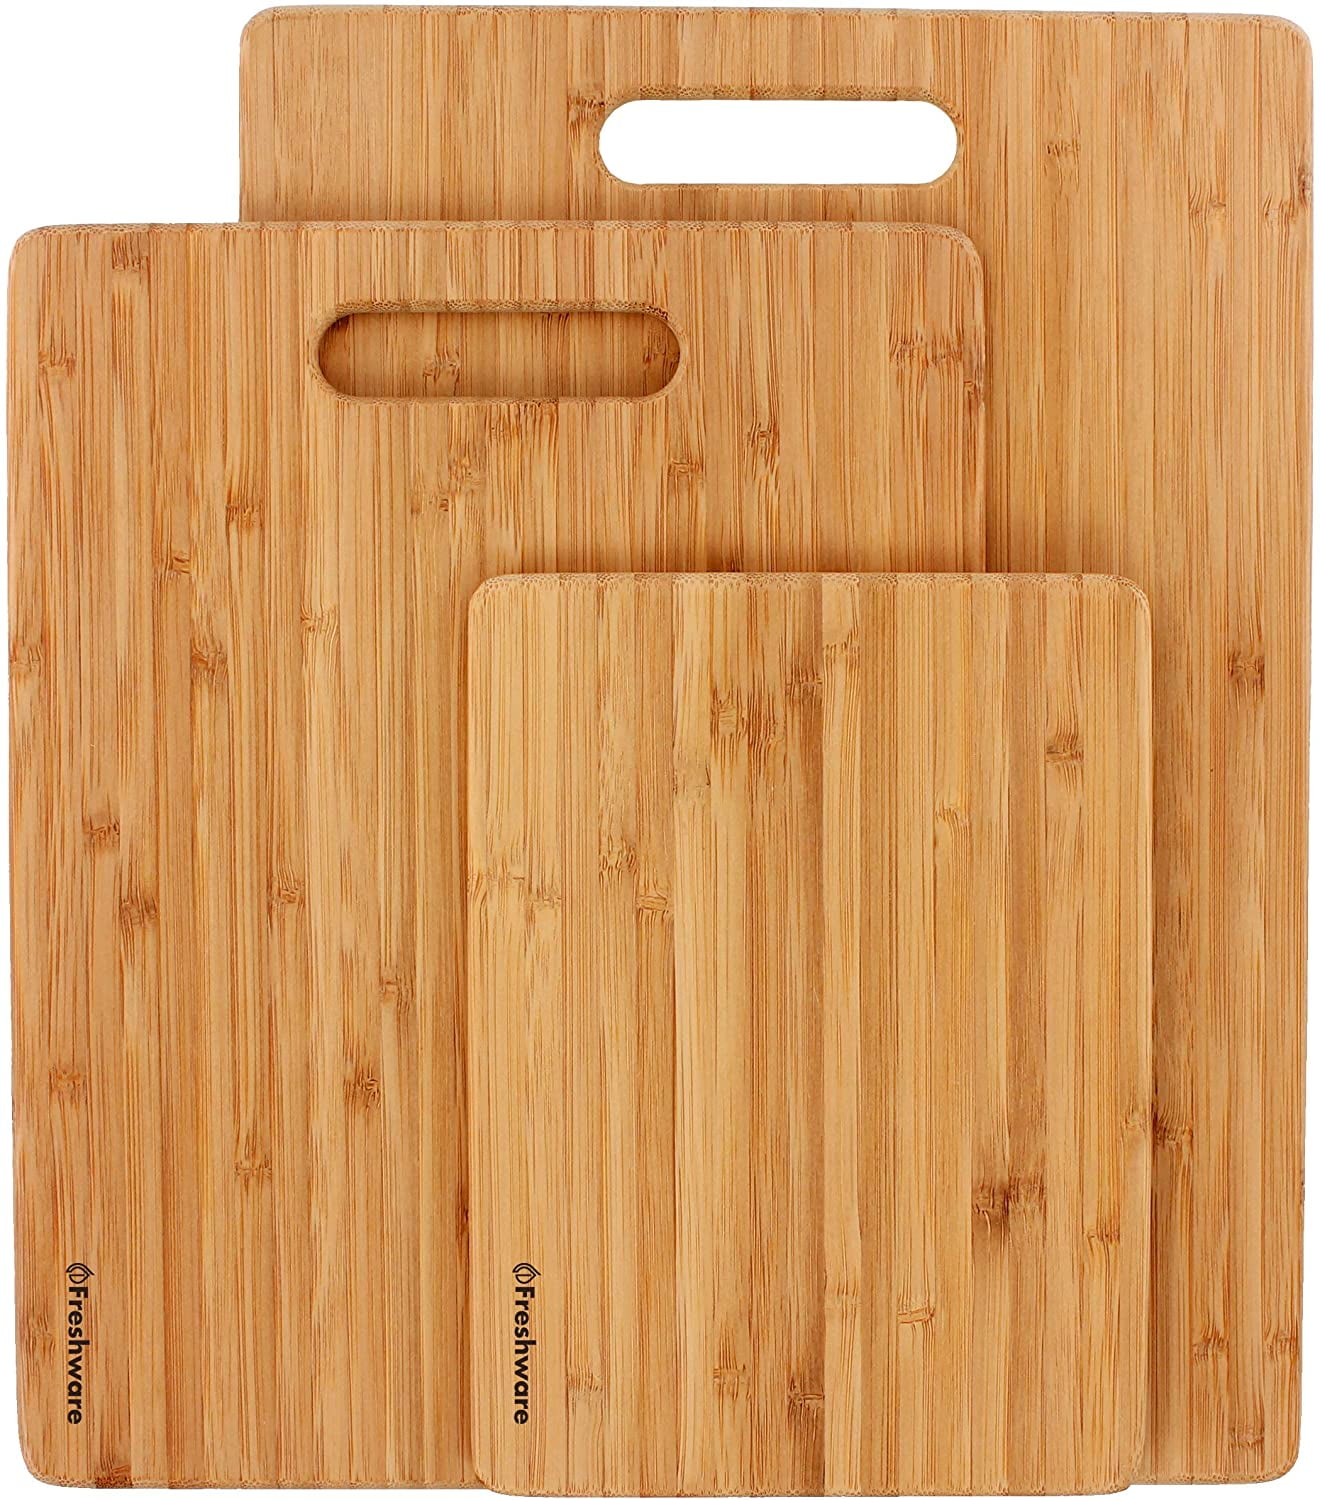 Hastings Home 3-Piece Set Bamboo Cutting Boards 855142CSZ